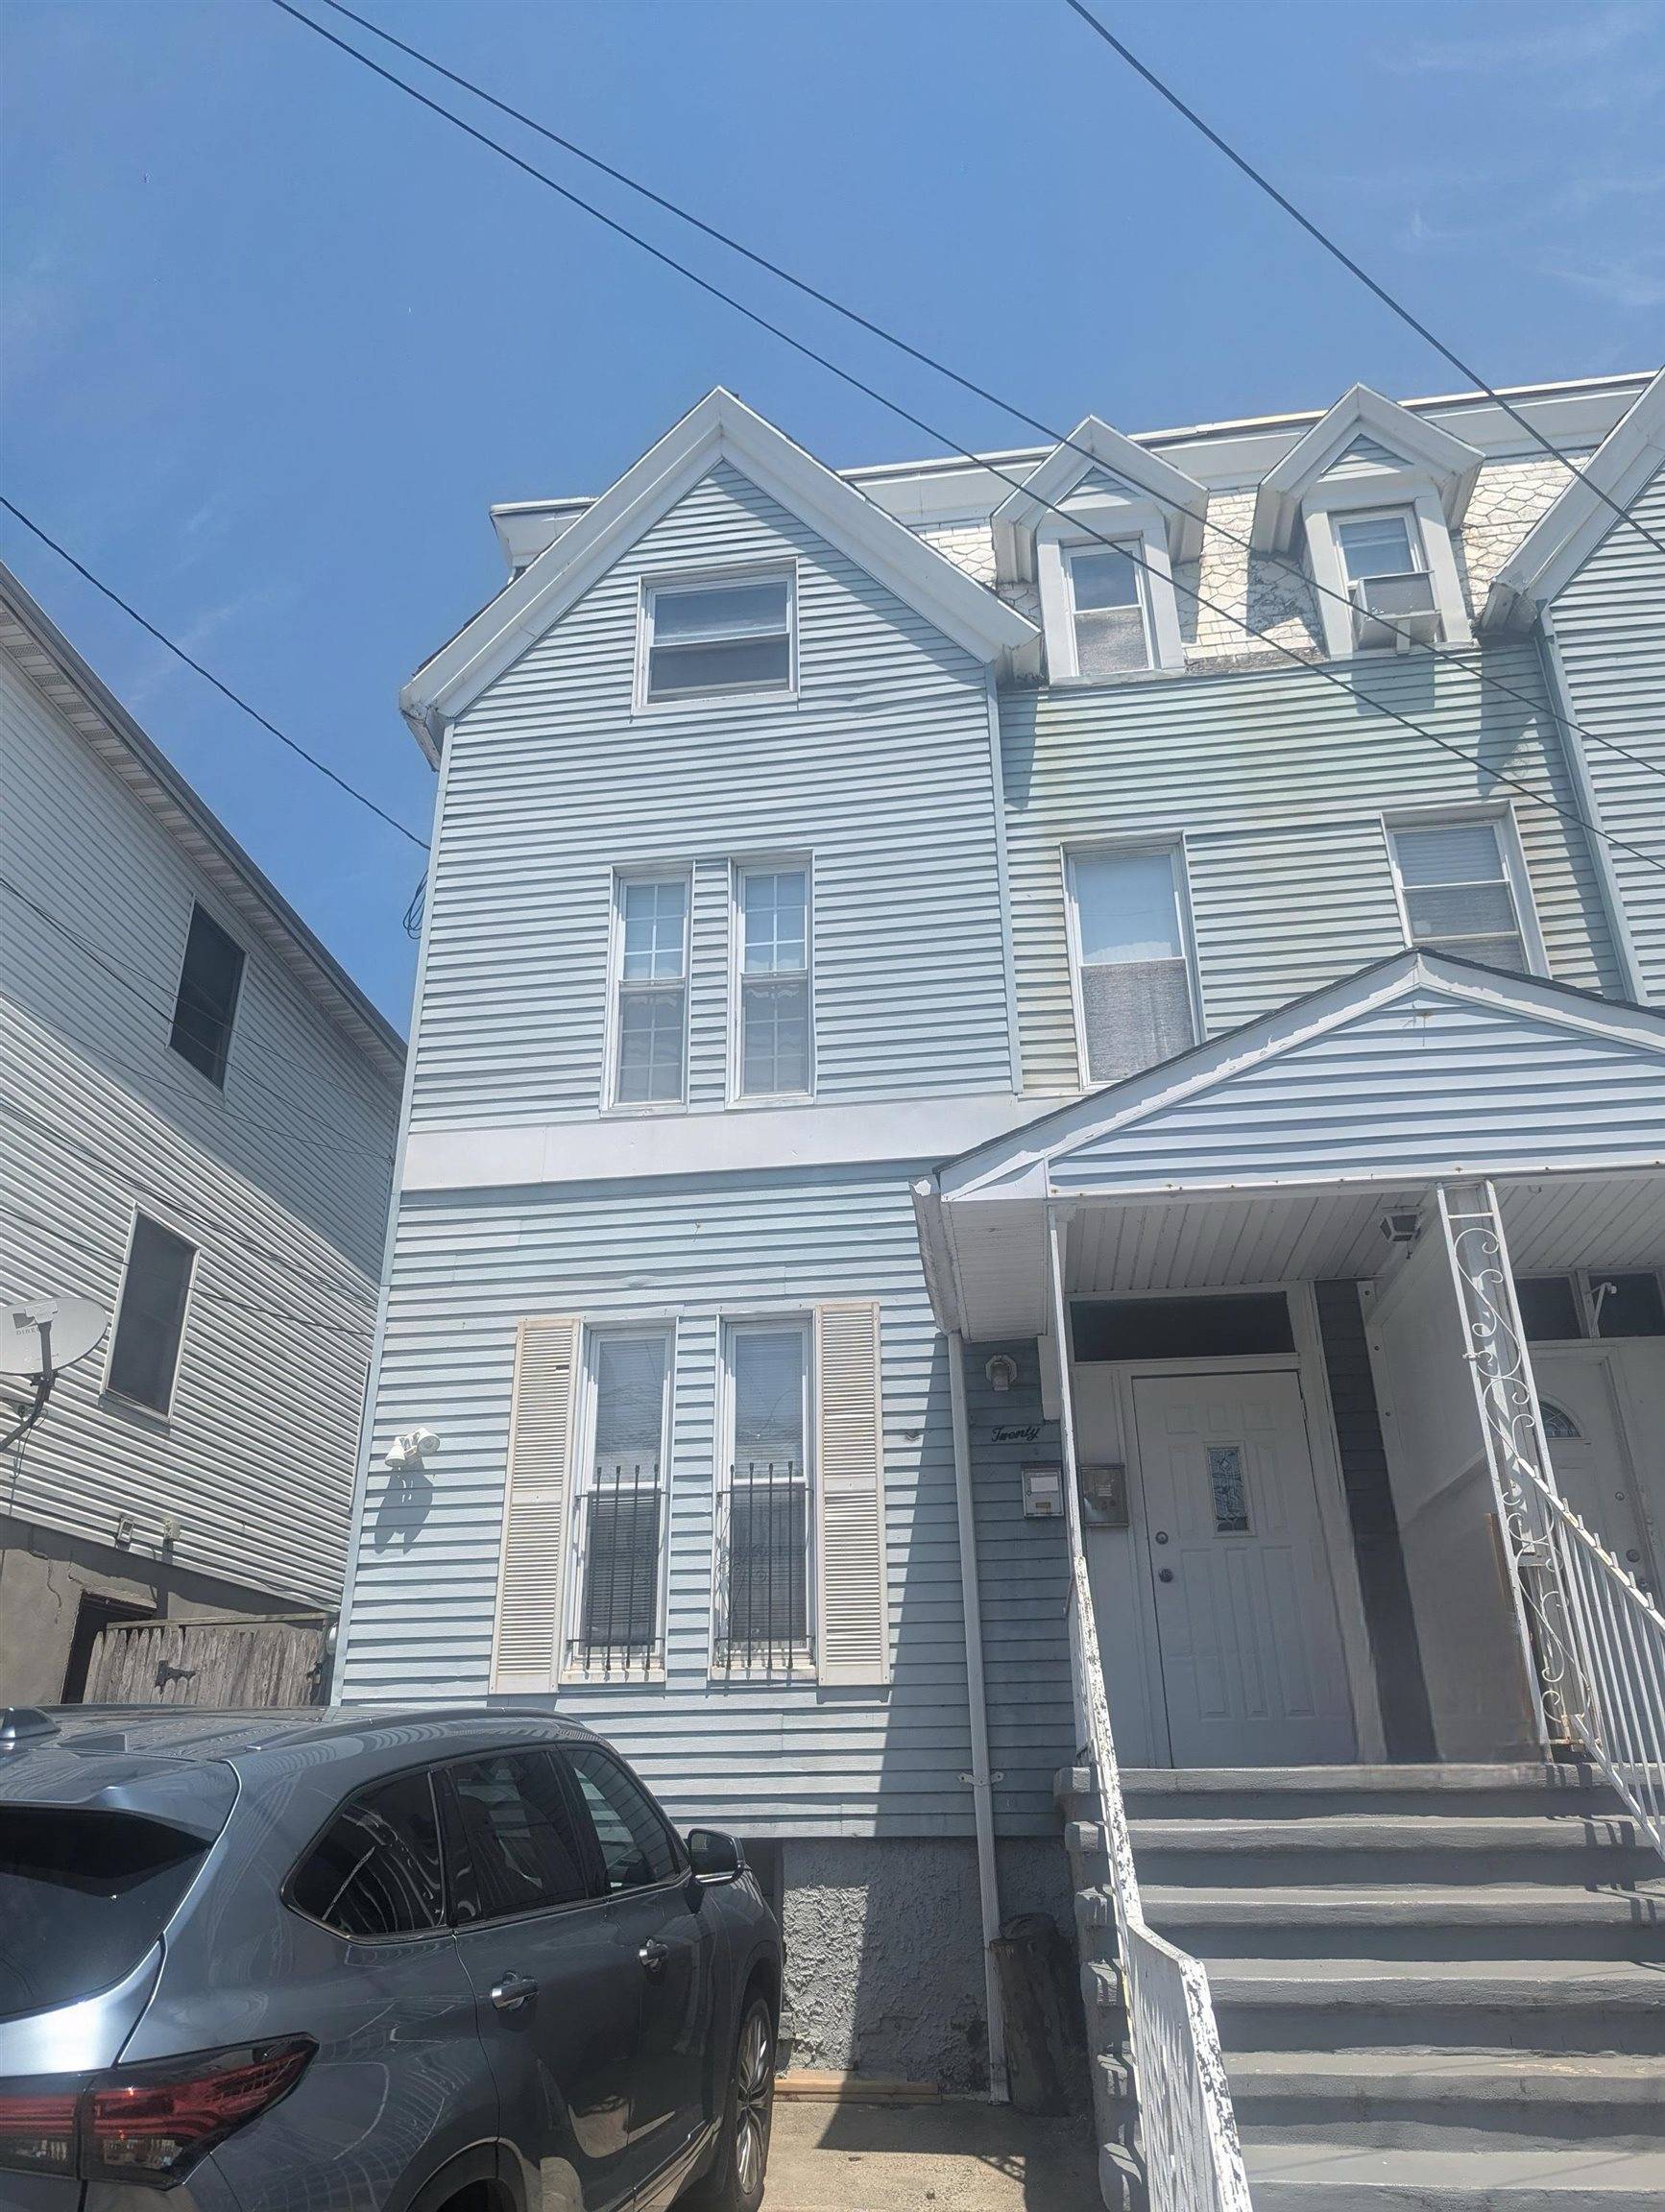 20 LINDEN AVE Multi-Family New Jersey